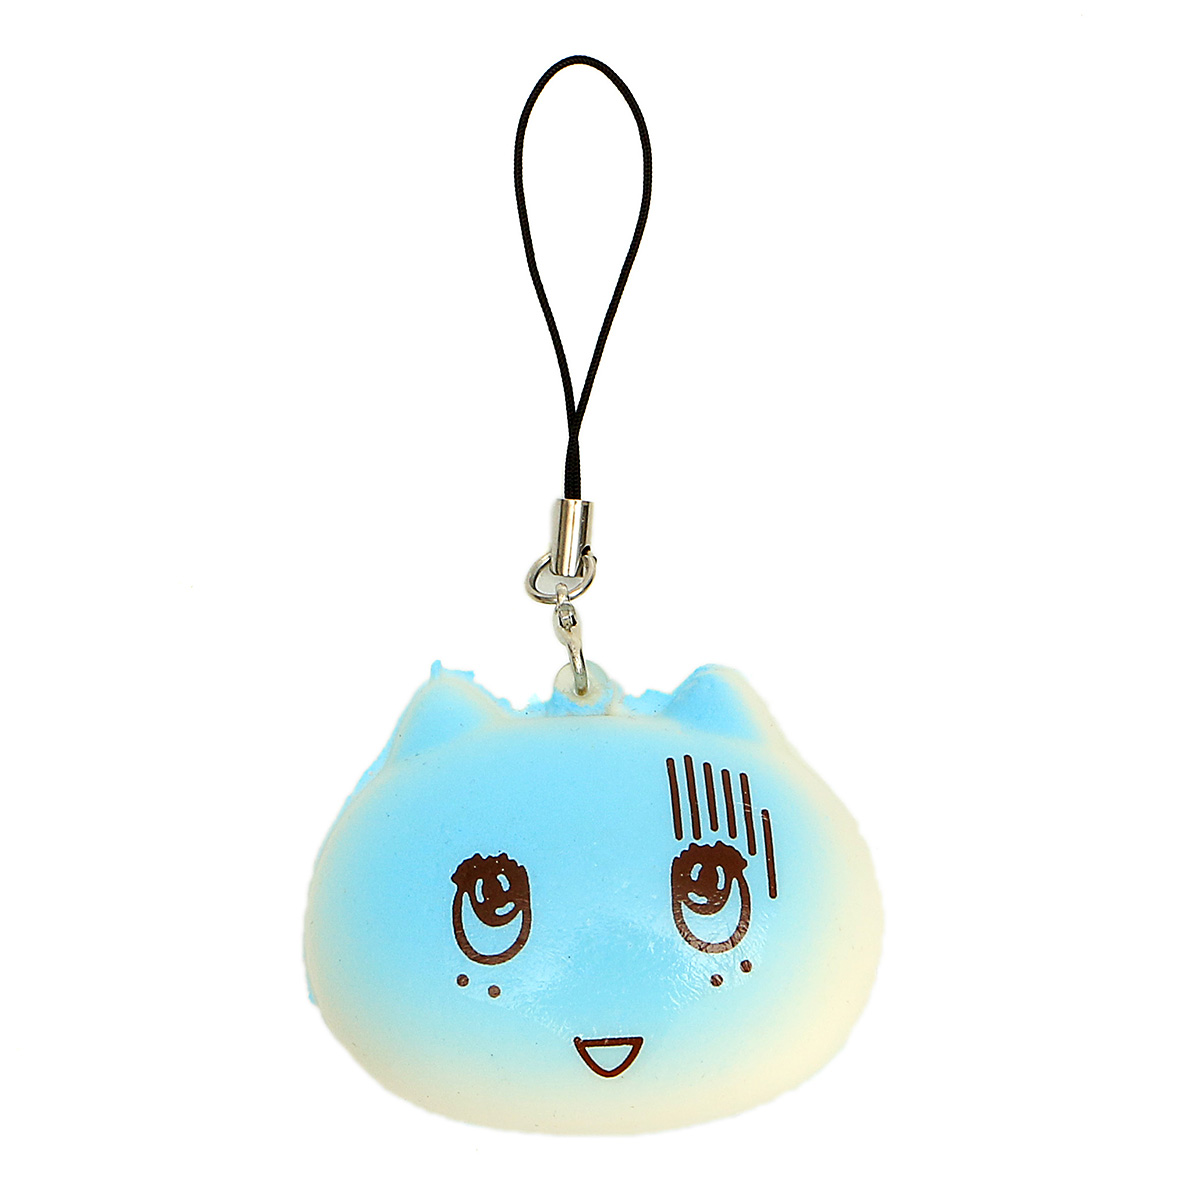 1PCS-Kawaii-Face-Simulate-Colorful-Cartoon-Totoro-Squishy-Toy-Stress-Reliever-Phone-Chain-1137334-6